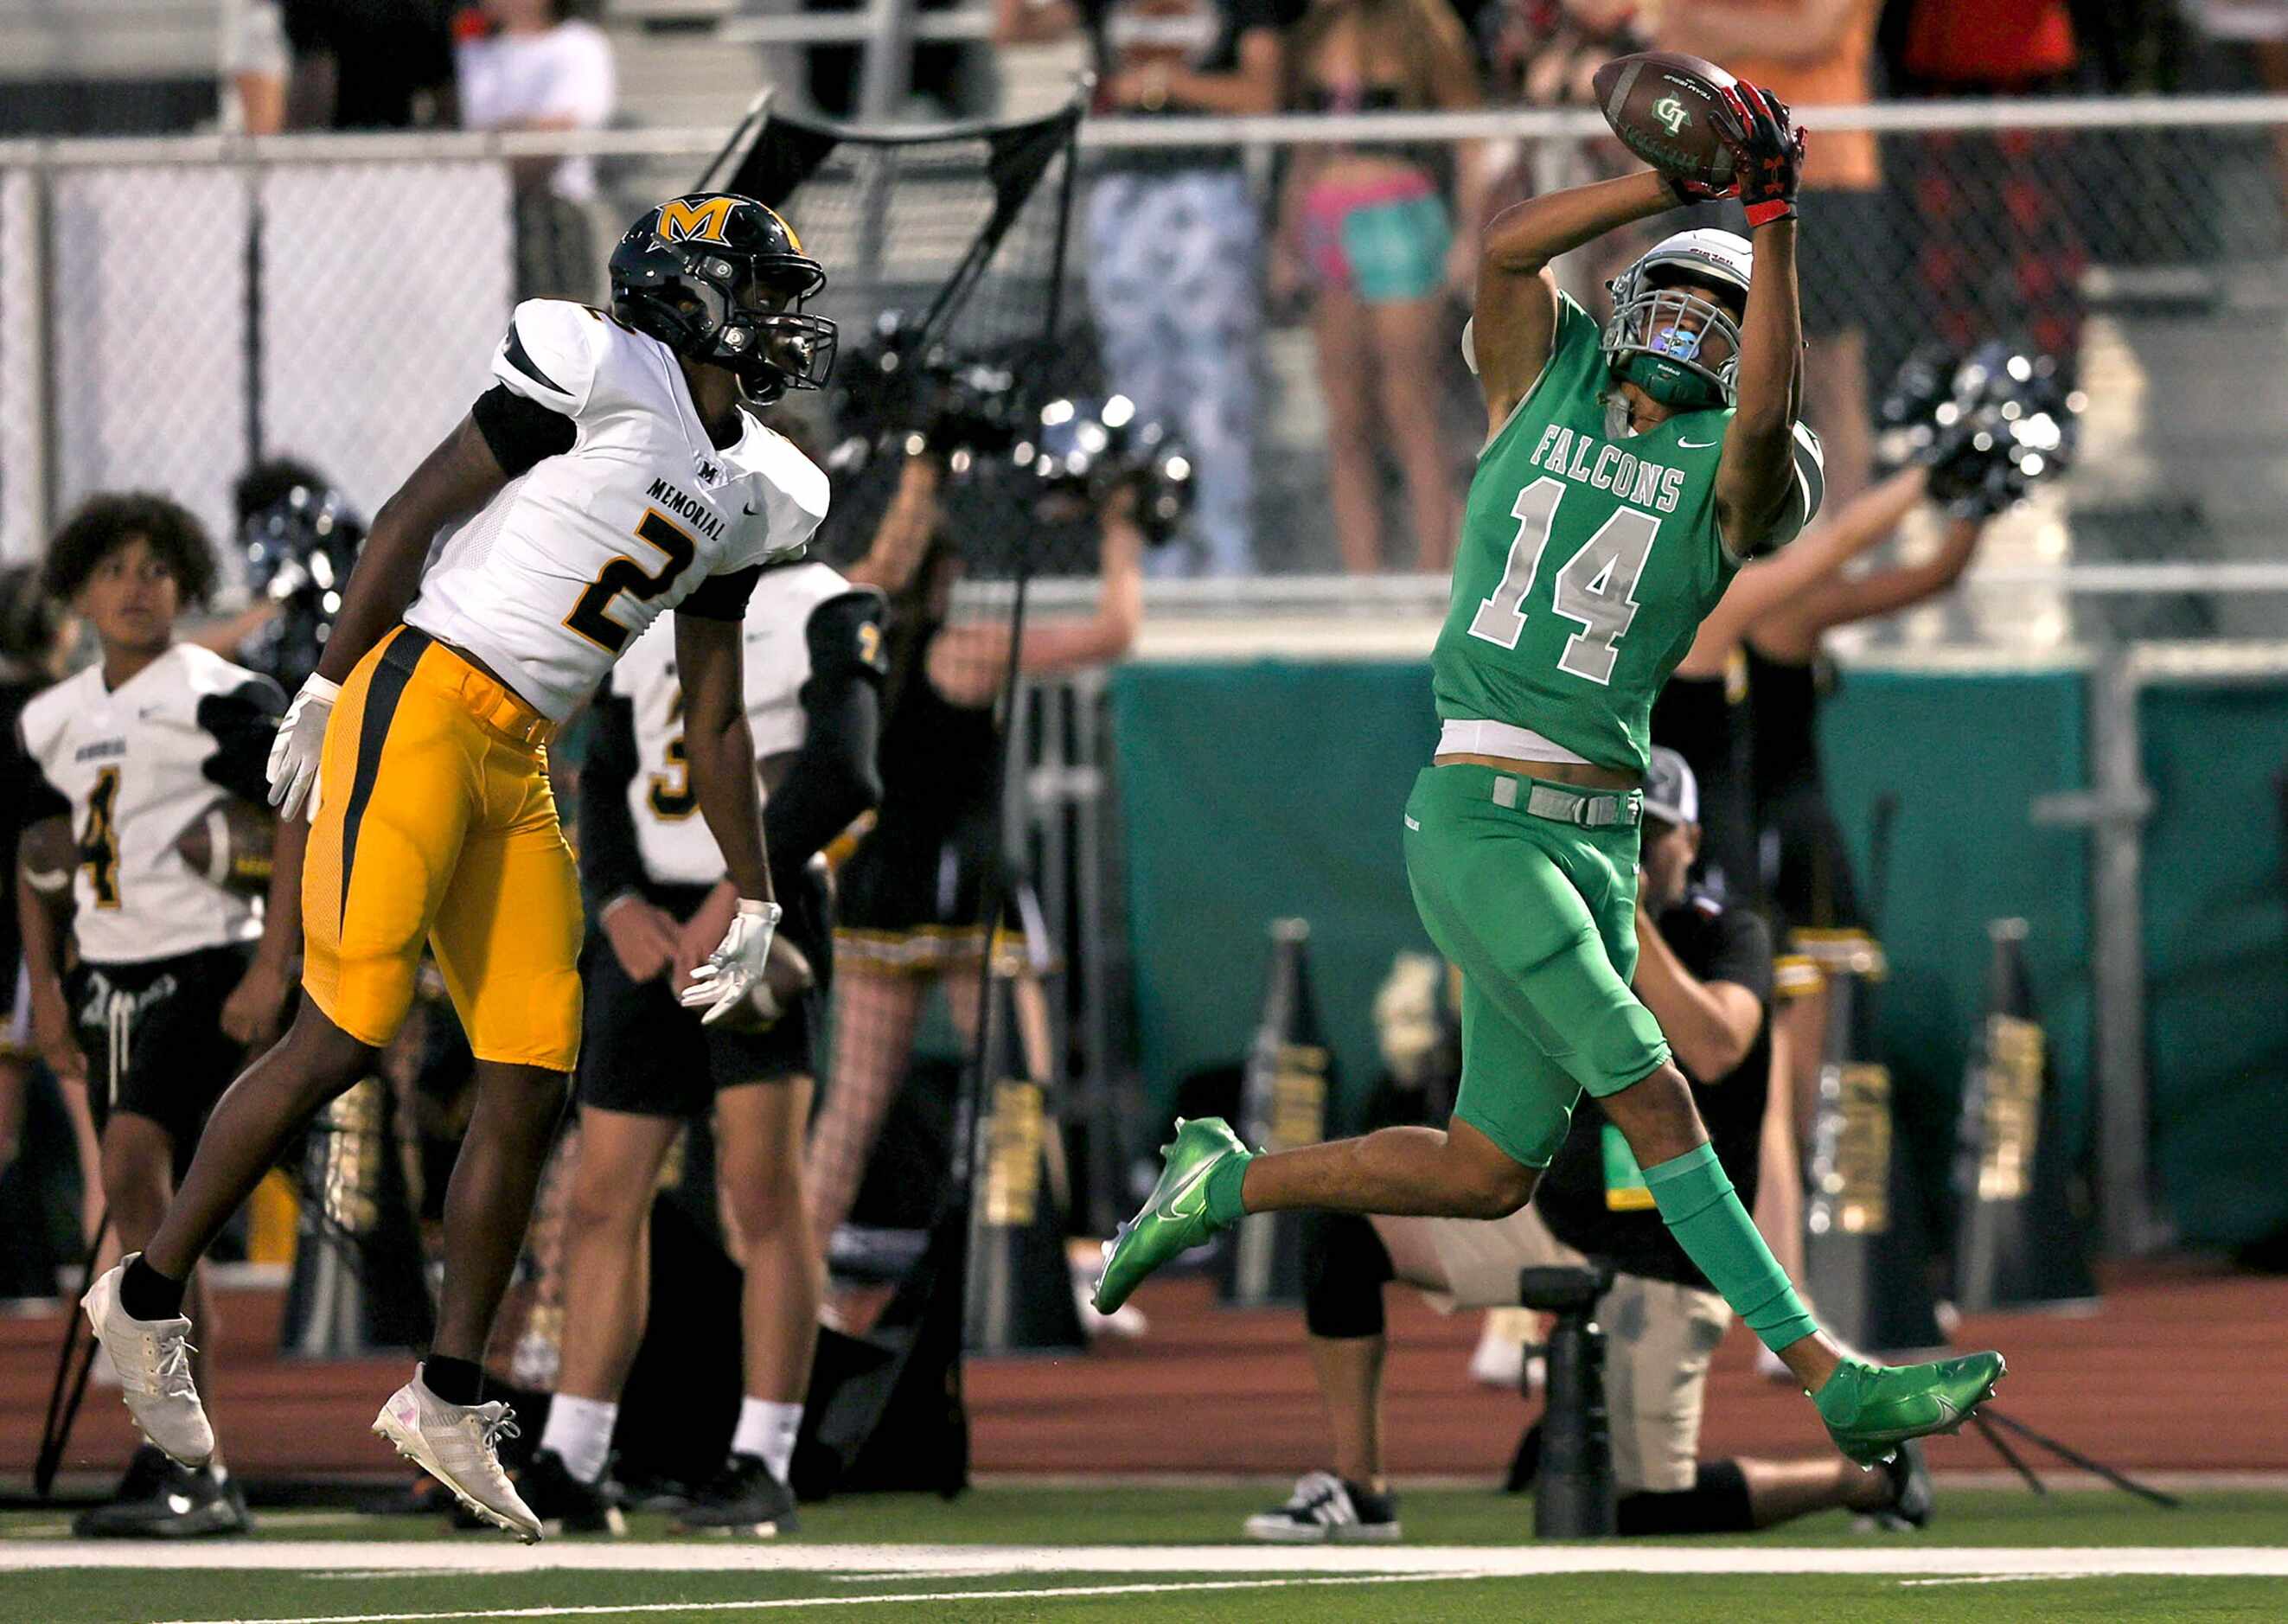 Lake Dallas wide receiver Evan Weinberg (14) comes up with touchdown reception against...